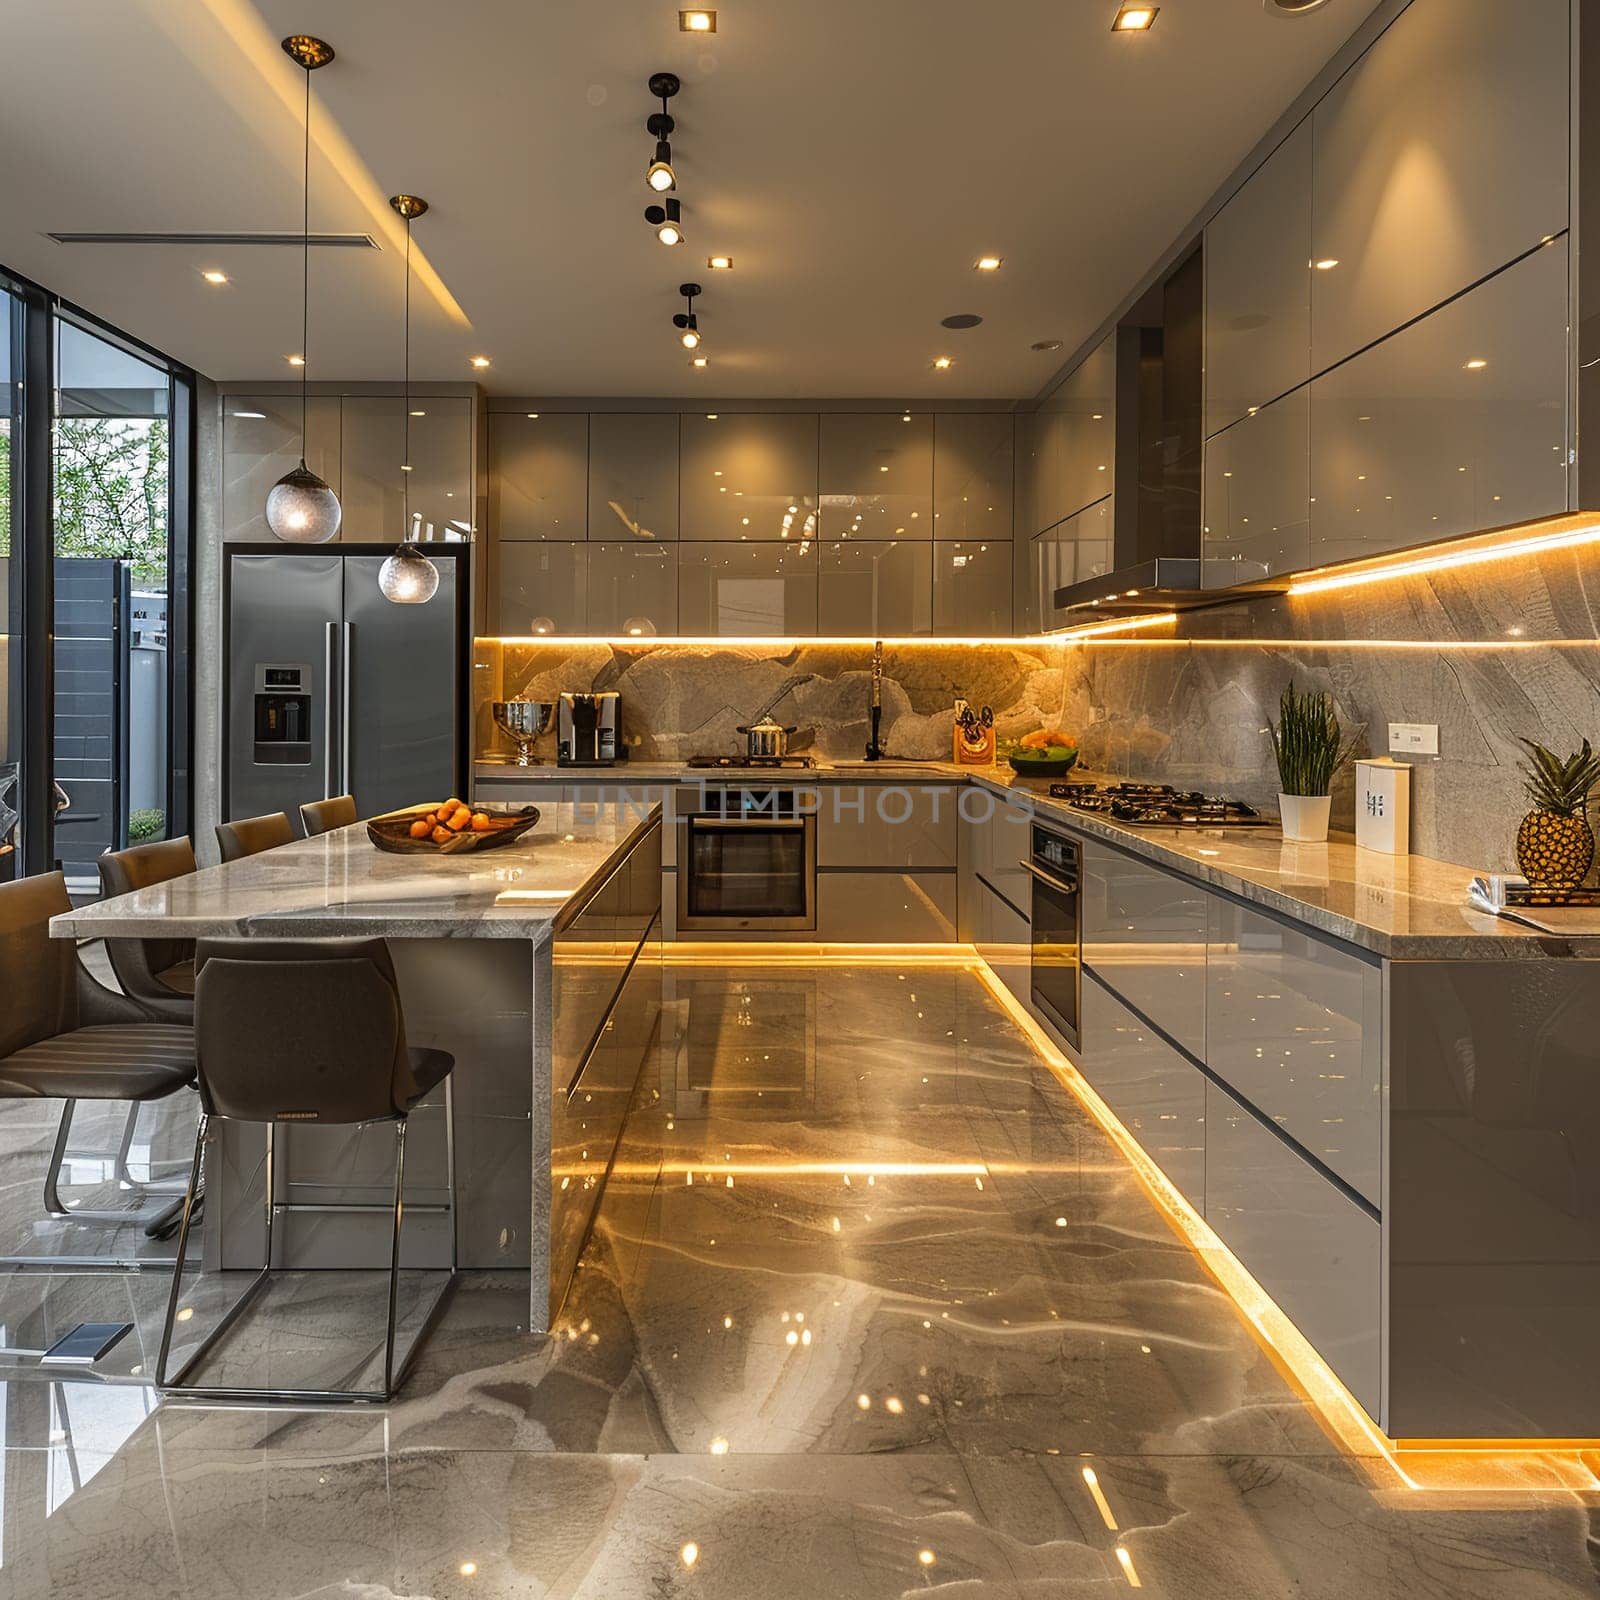 A sleek modern kitchen with state-of-the-art appliances, illustrating interior design.